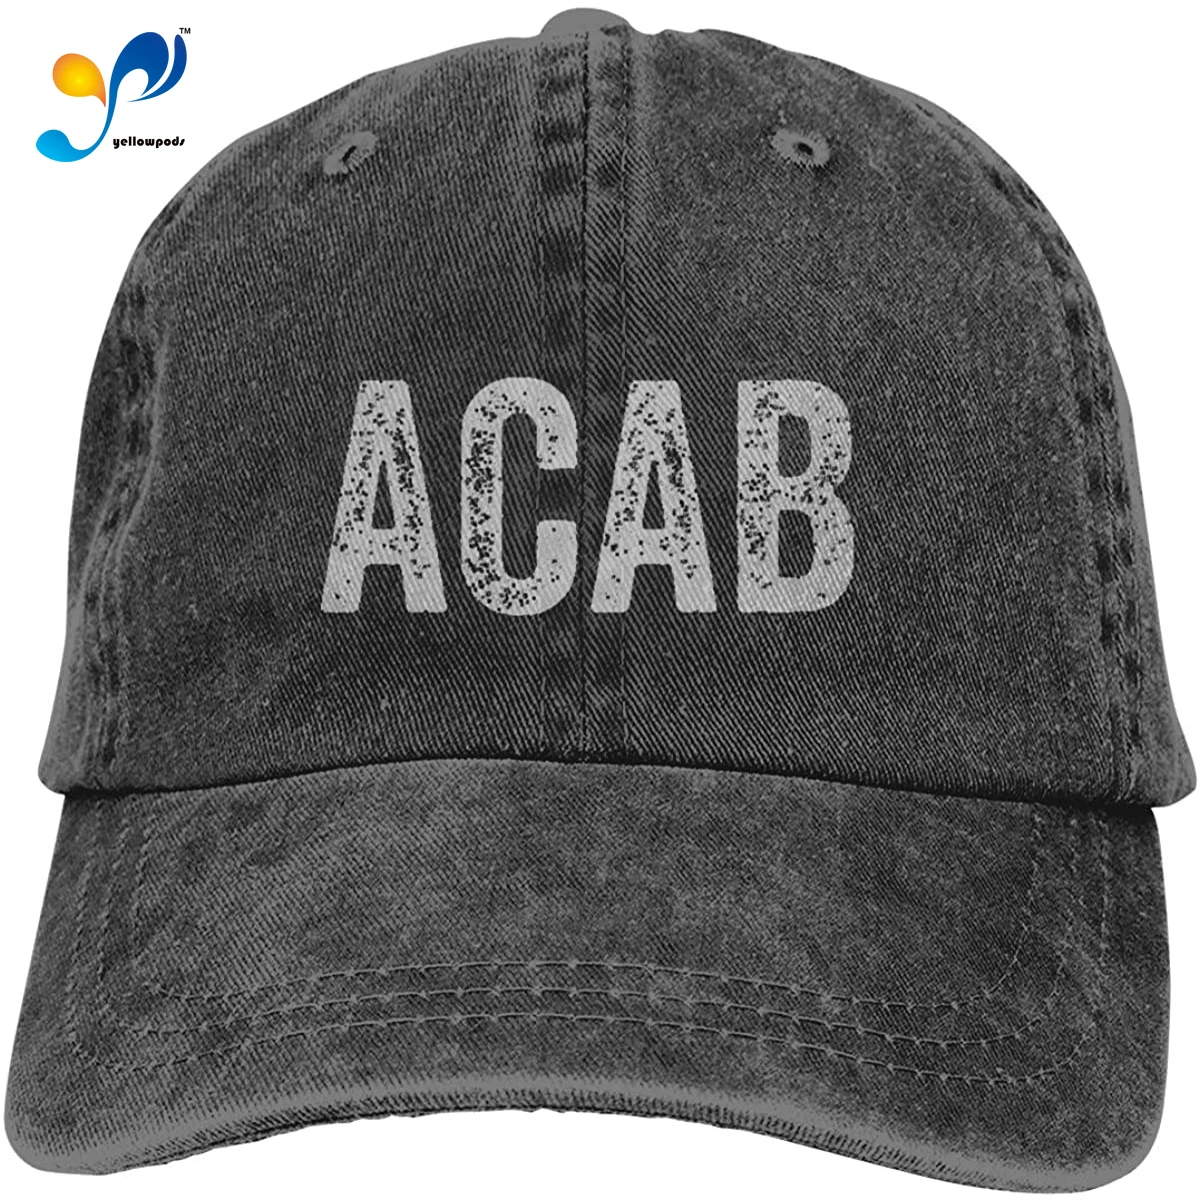 

ACAB Anti Cop Stop Police Brutality Protest Statement Unisex Classic Vintage Washed Denim Baseball Cap Caps Hats for Women